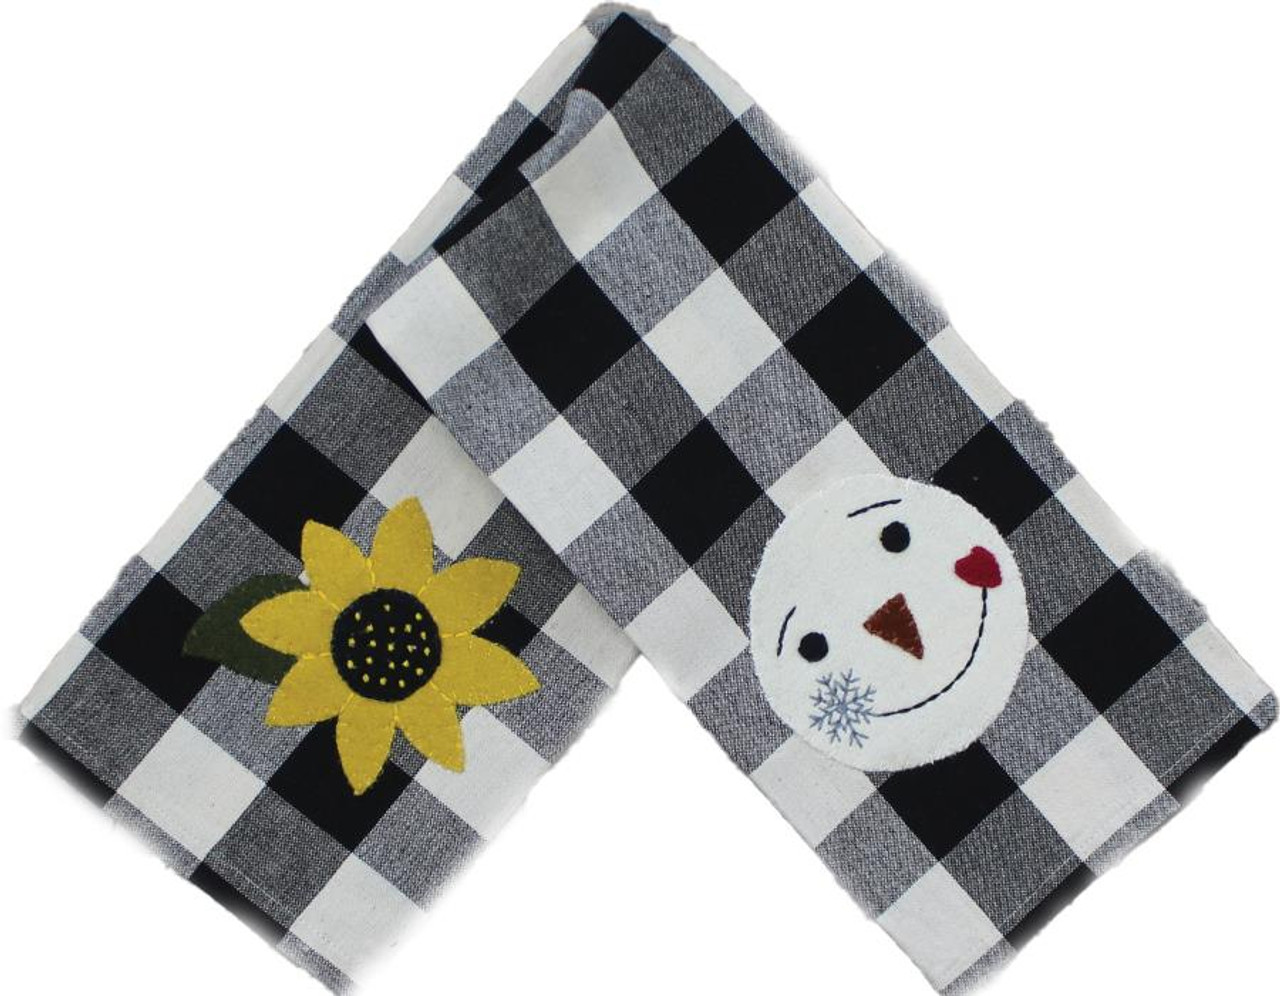 https://cdn11.bigcommerce.com/s-tfdhmk/images/stencil/1280x1280/products/23114/141456/Sunflower-Snowman-Face-Buffalo-Check-Towels-Black-Set-of-2-400000674551_image1__08012.1662661415.jpg?c=2